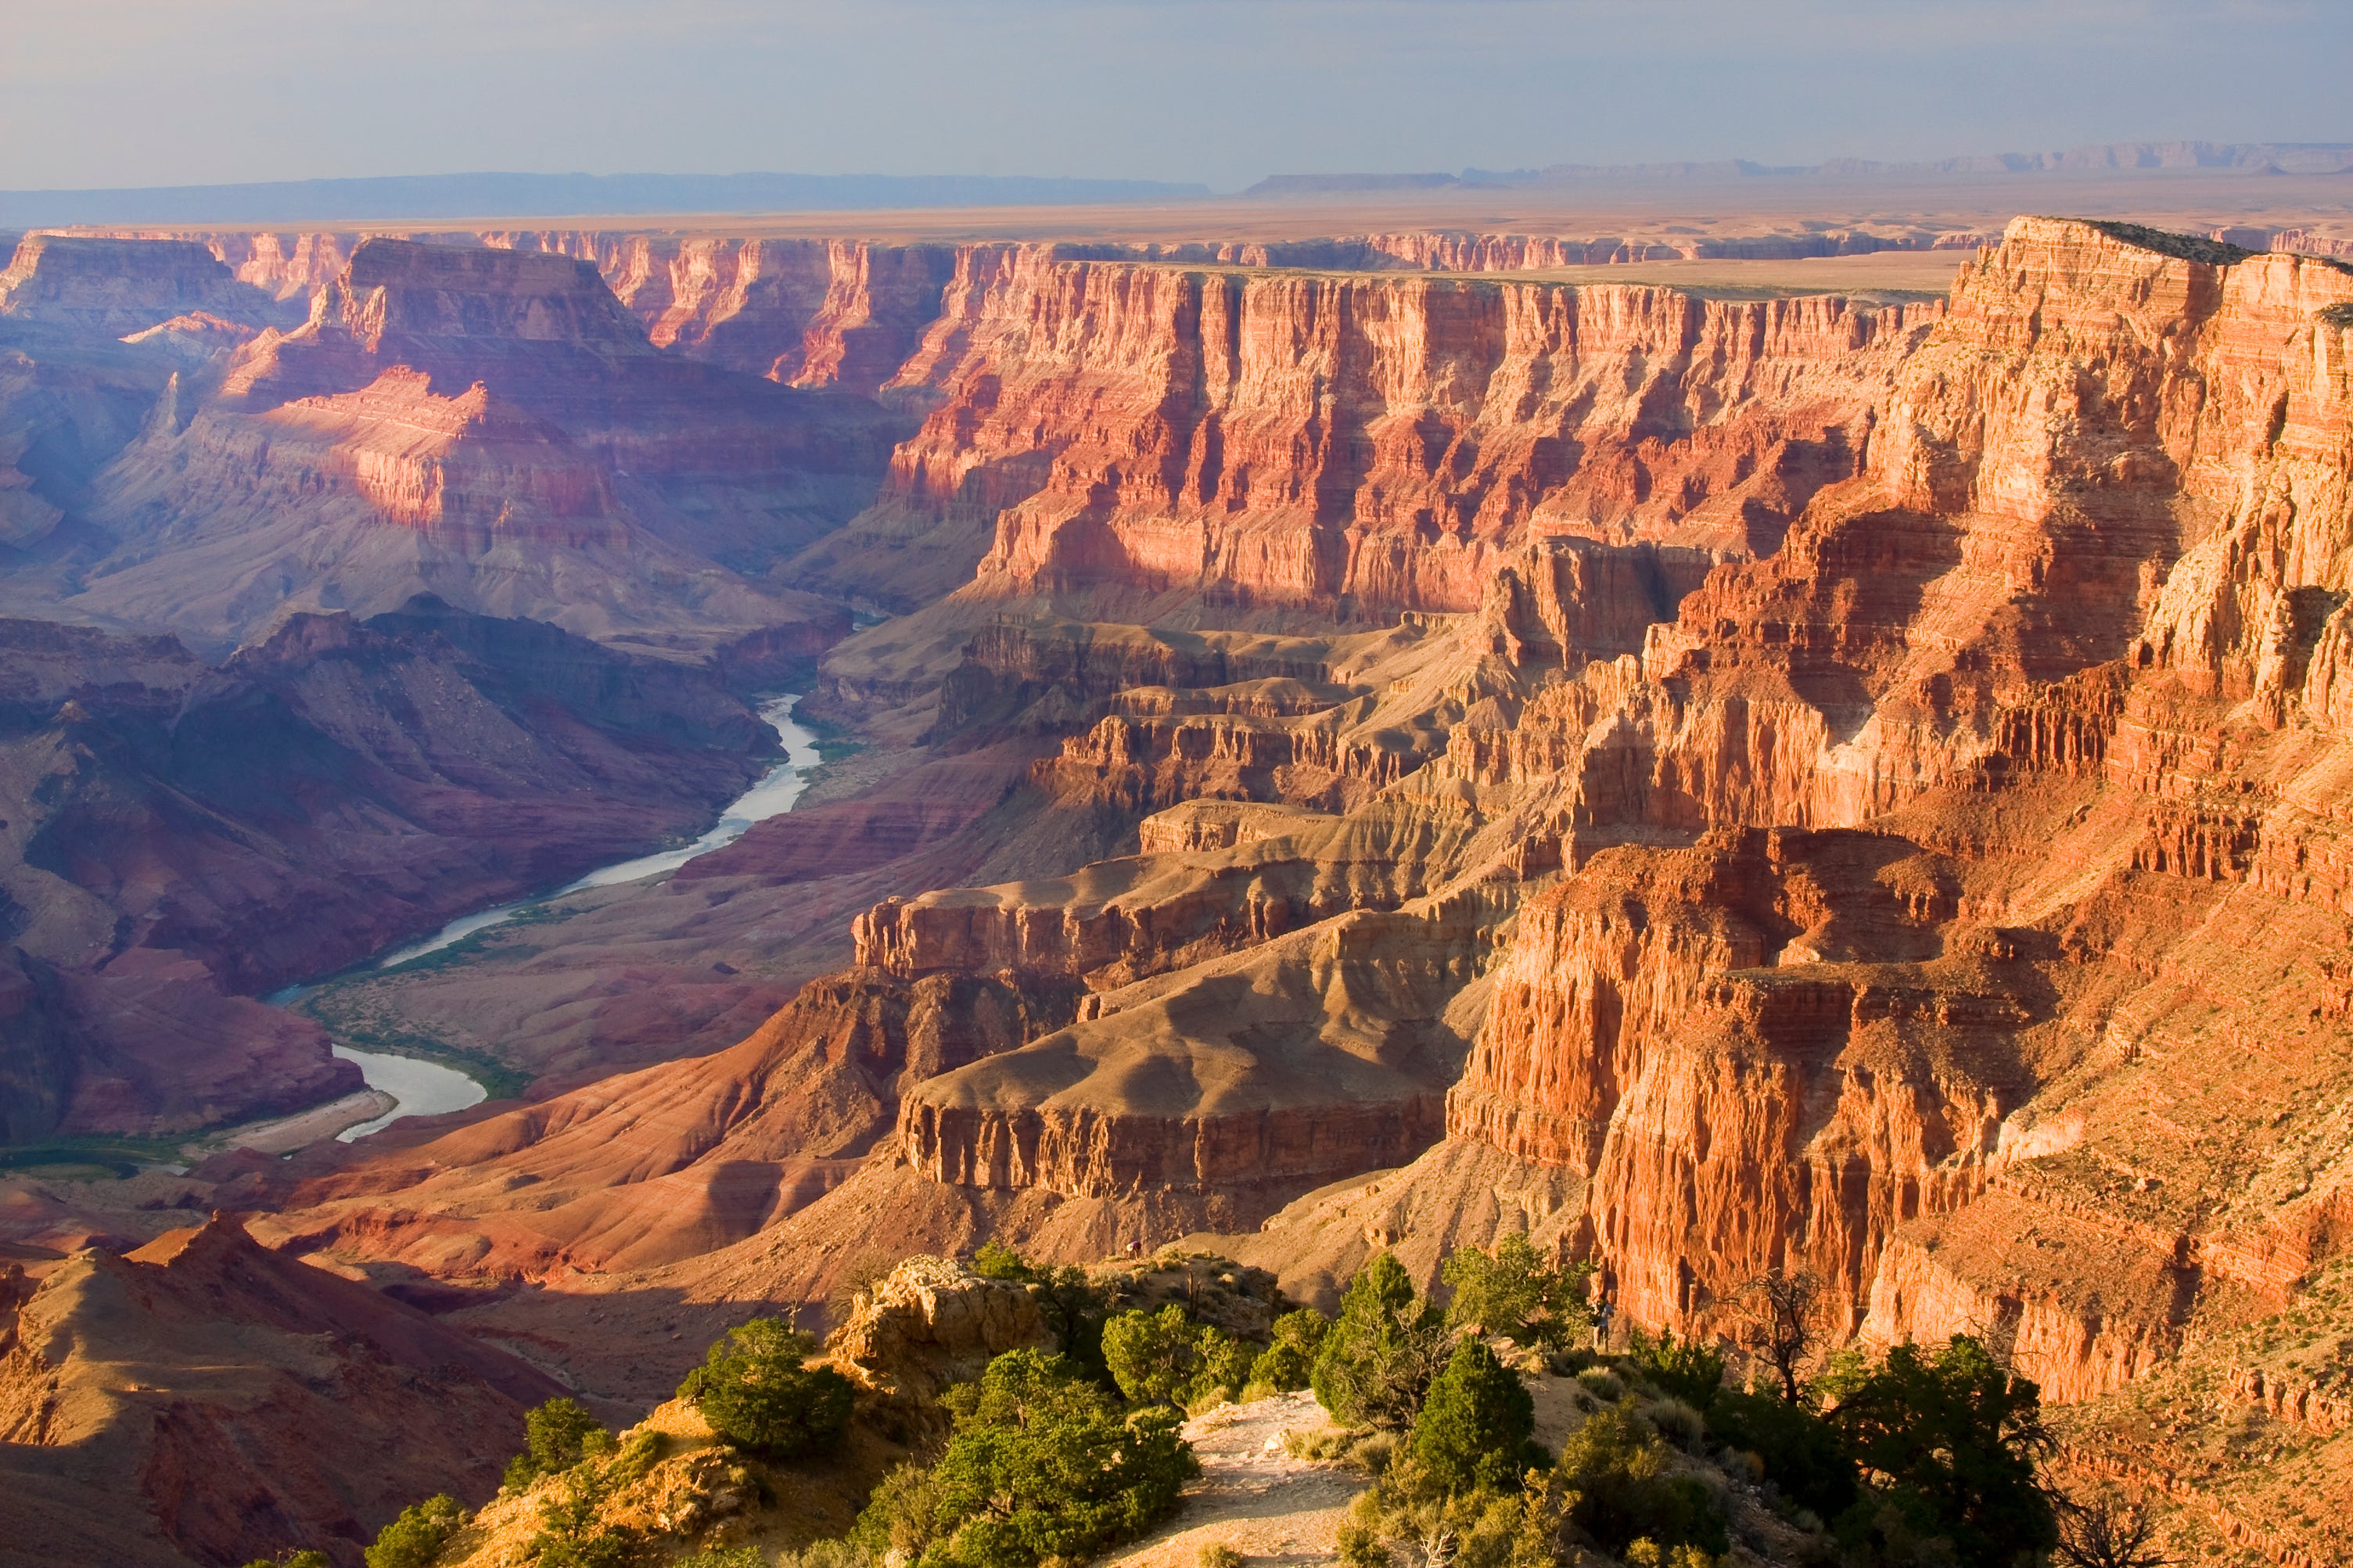 Some sections of the Grand Canyon are 18 miles wide